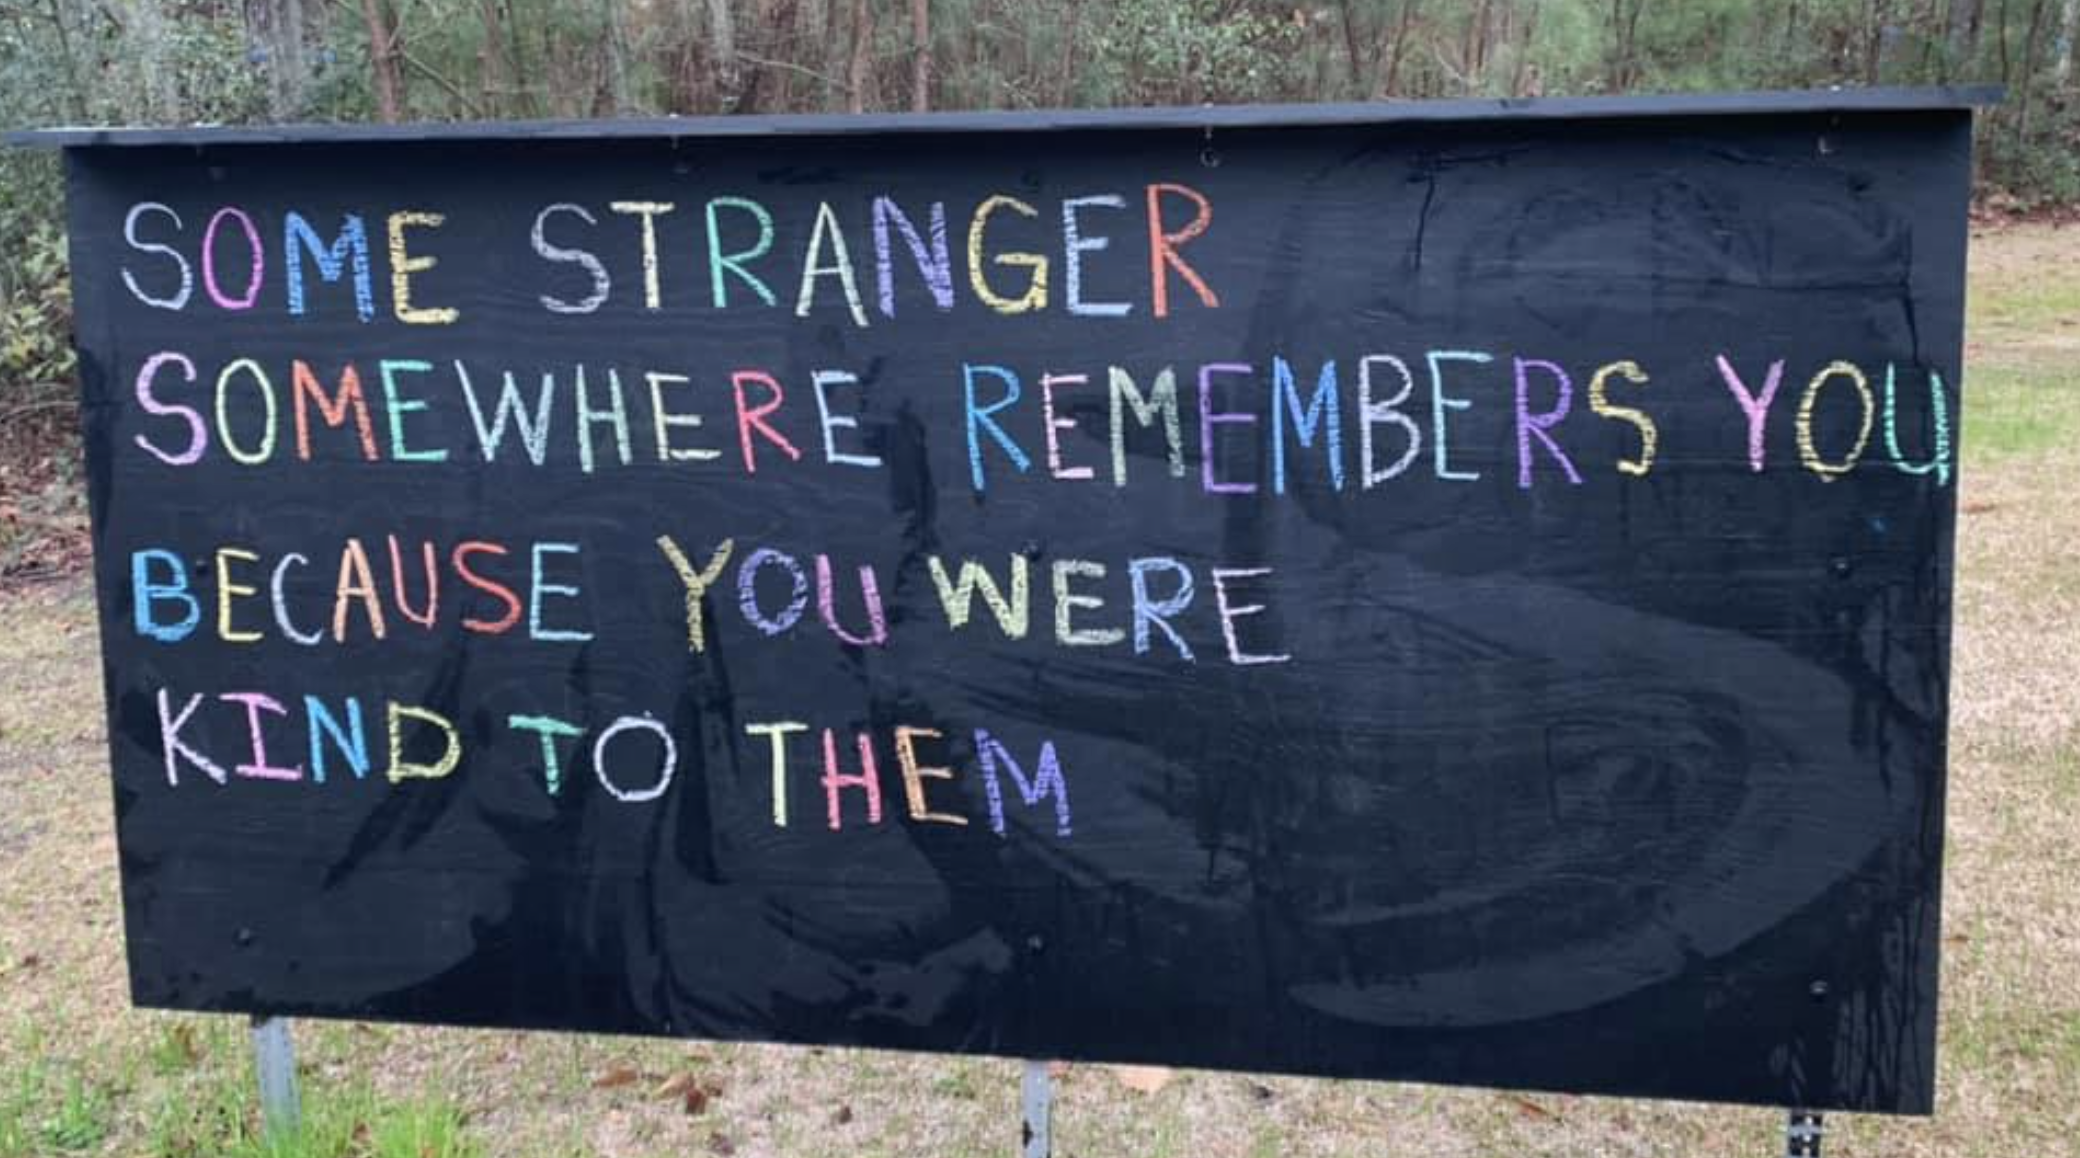 "Some stranger somewhere remembers you because you were kind to them" written on a sign with chalk